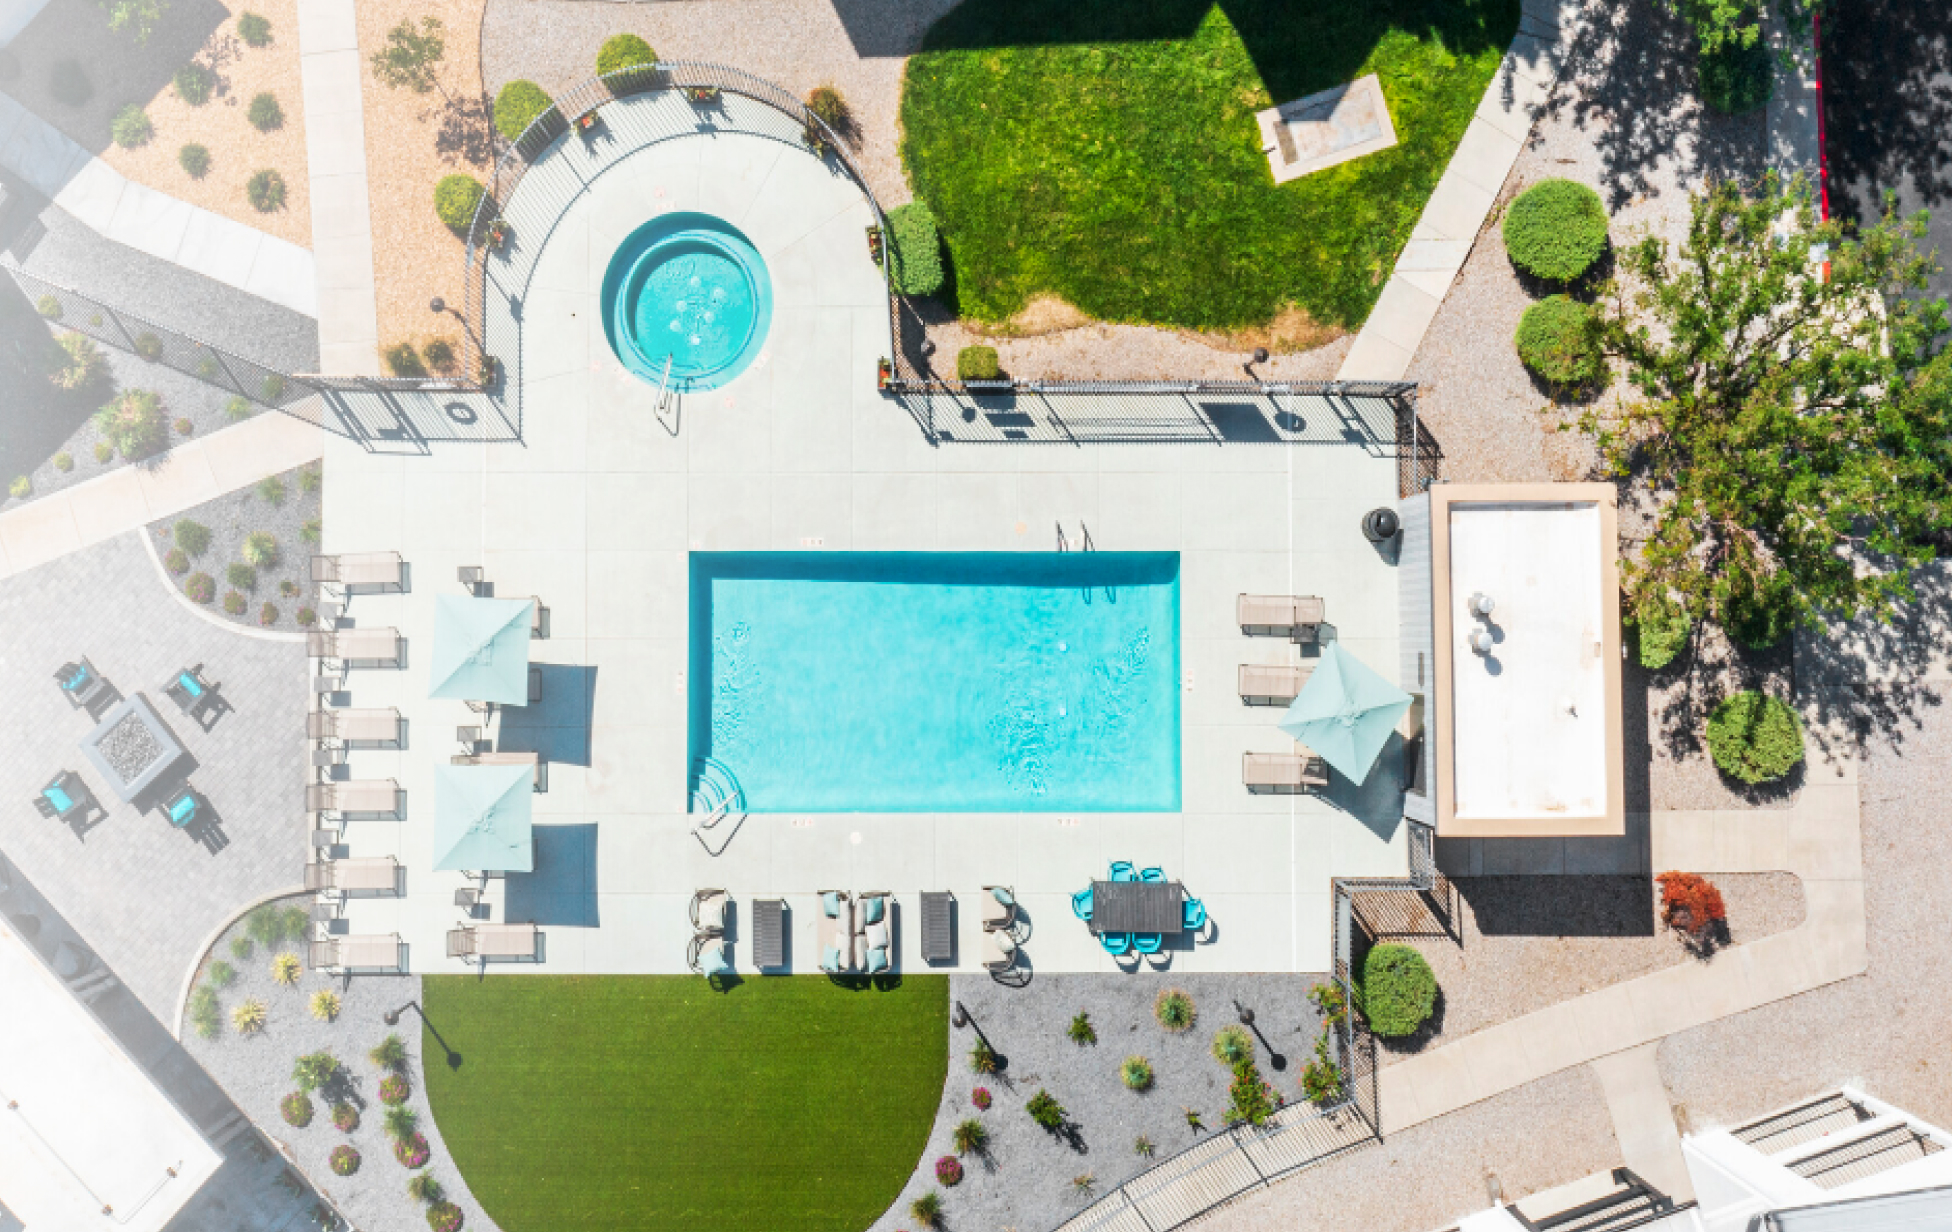 A drone camera shot looking down on an outdoor pool and patio.